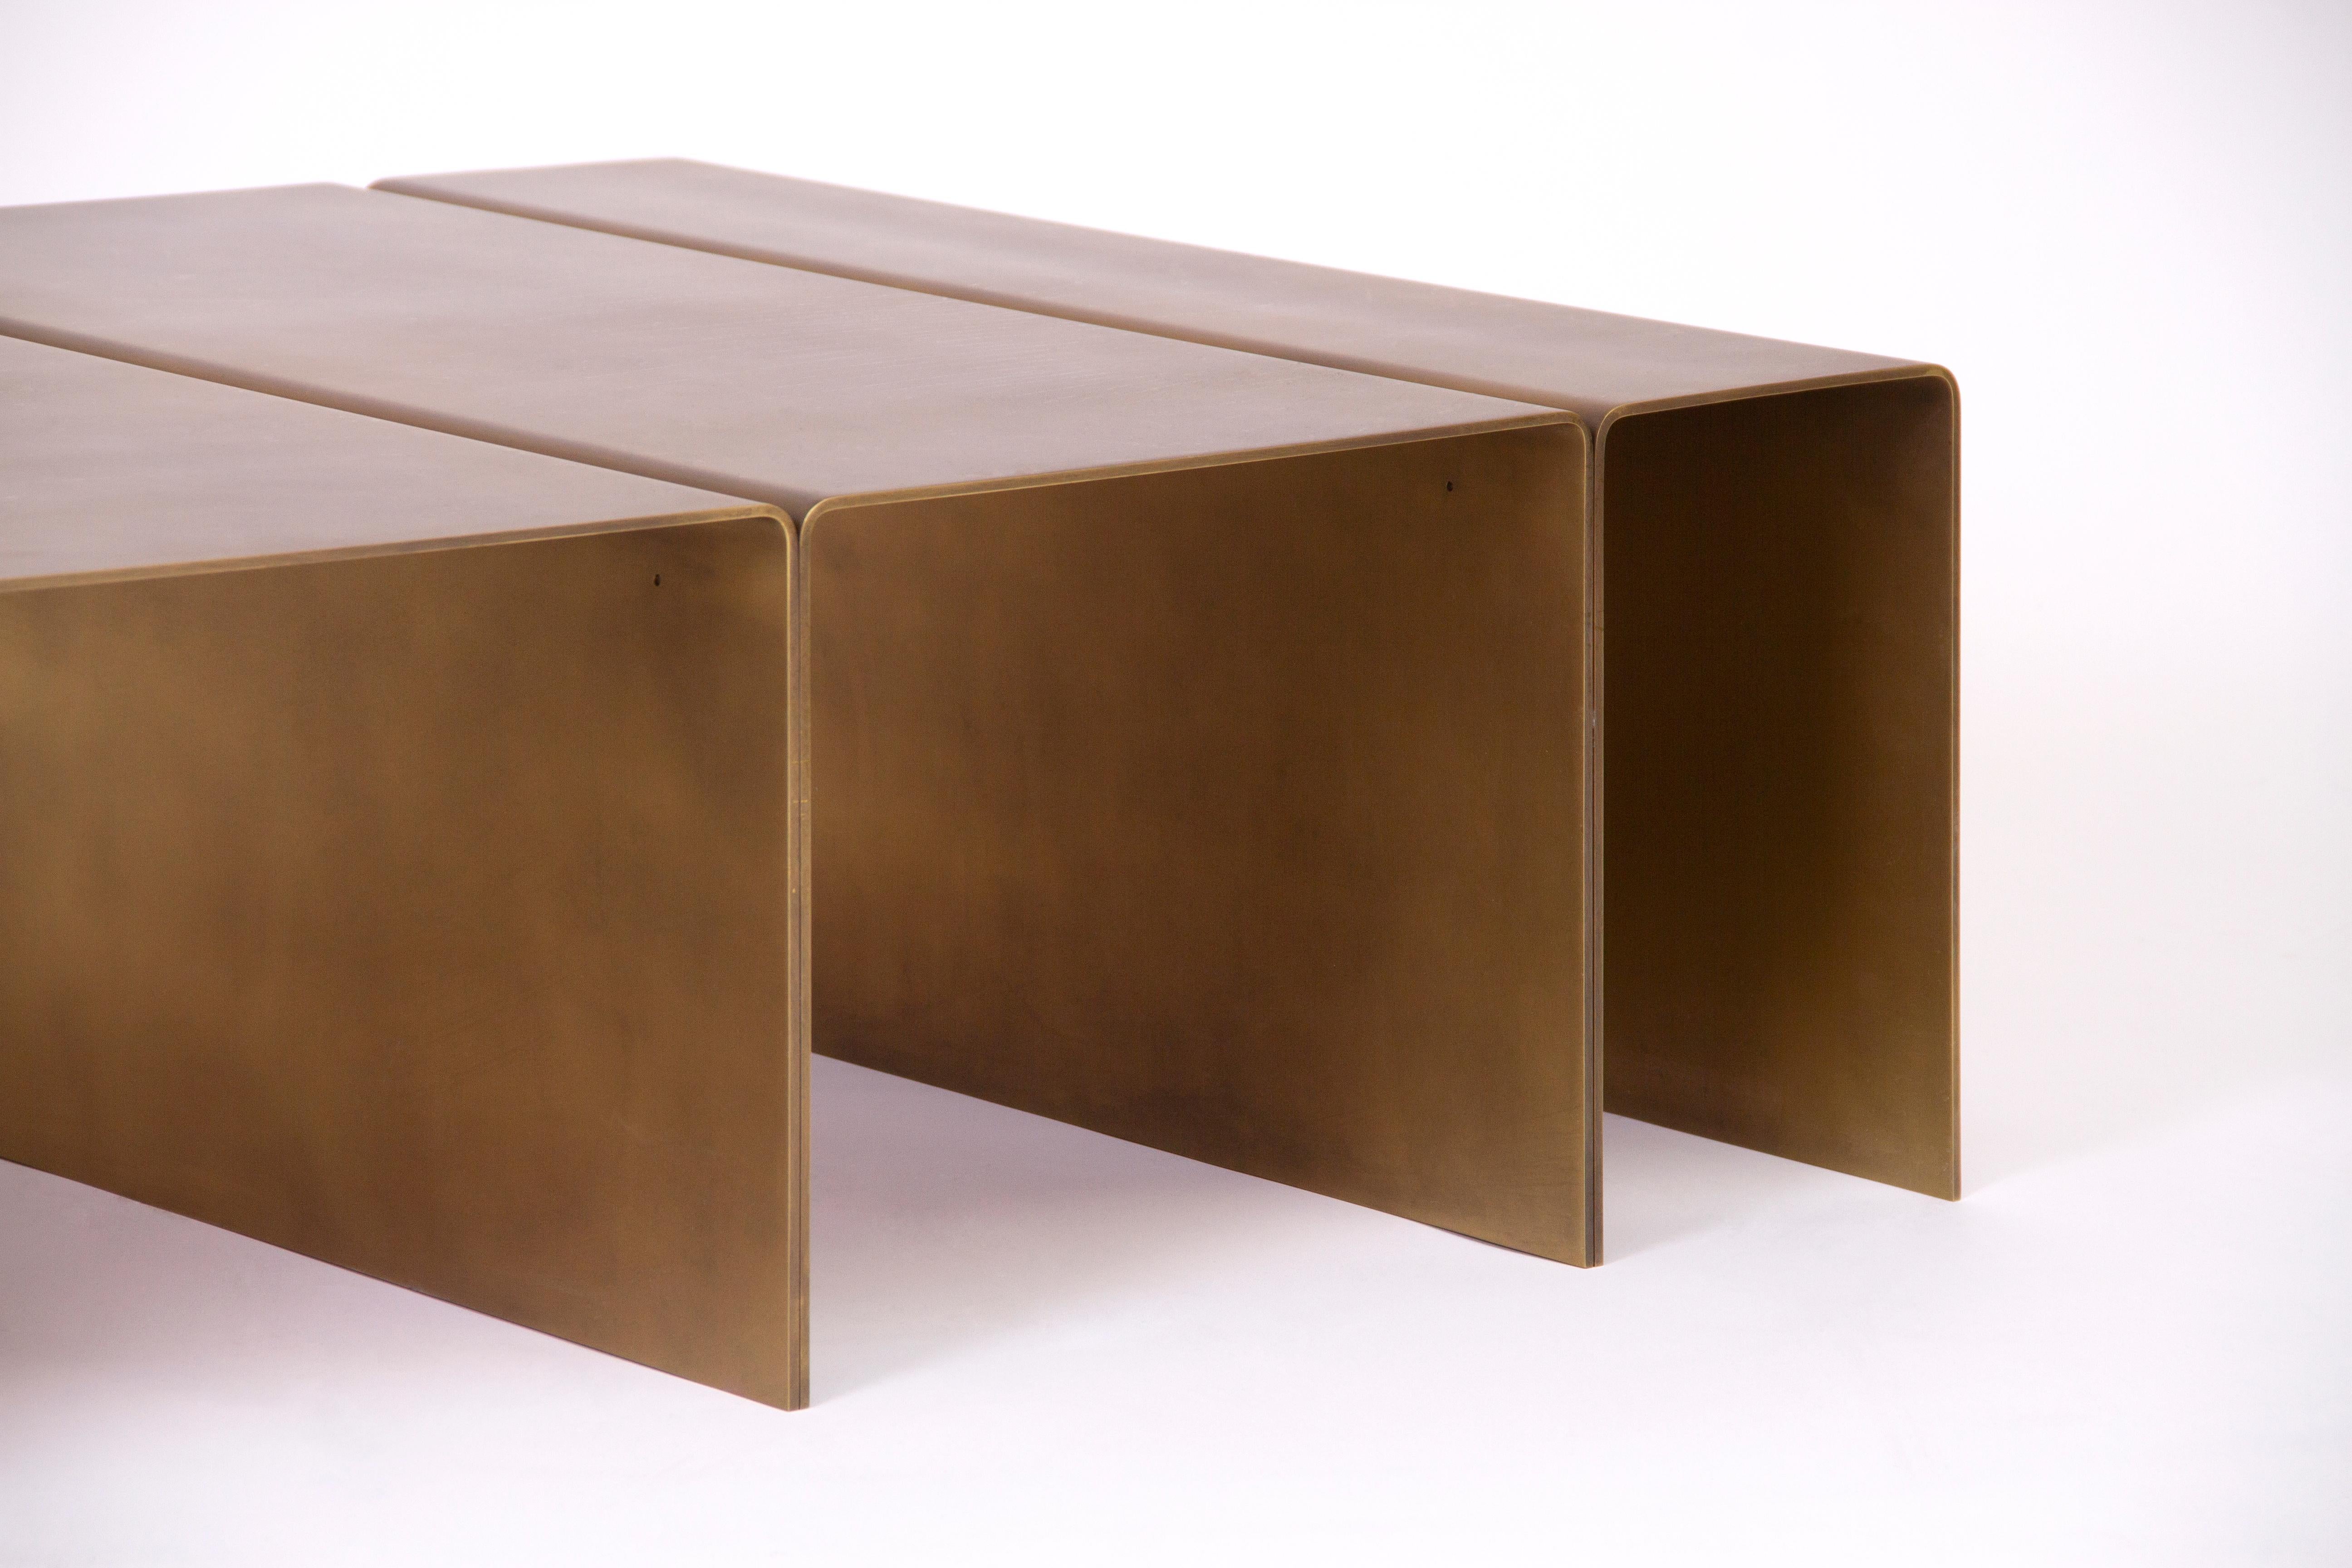 Contemporary coffee table made from solid brass in a burnished finish. 
Sealed with a clear protective coating.

Also available in brushed aluminum and blackened steel.

Designed and made by hand in Los Angeles, California.